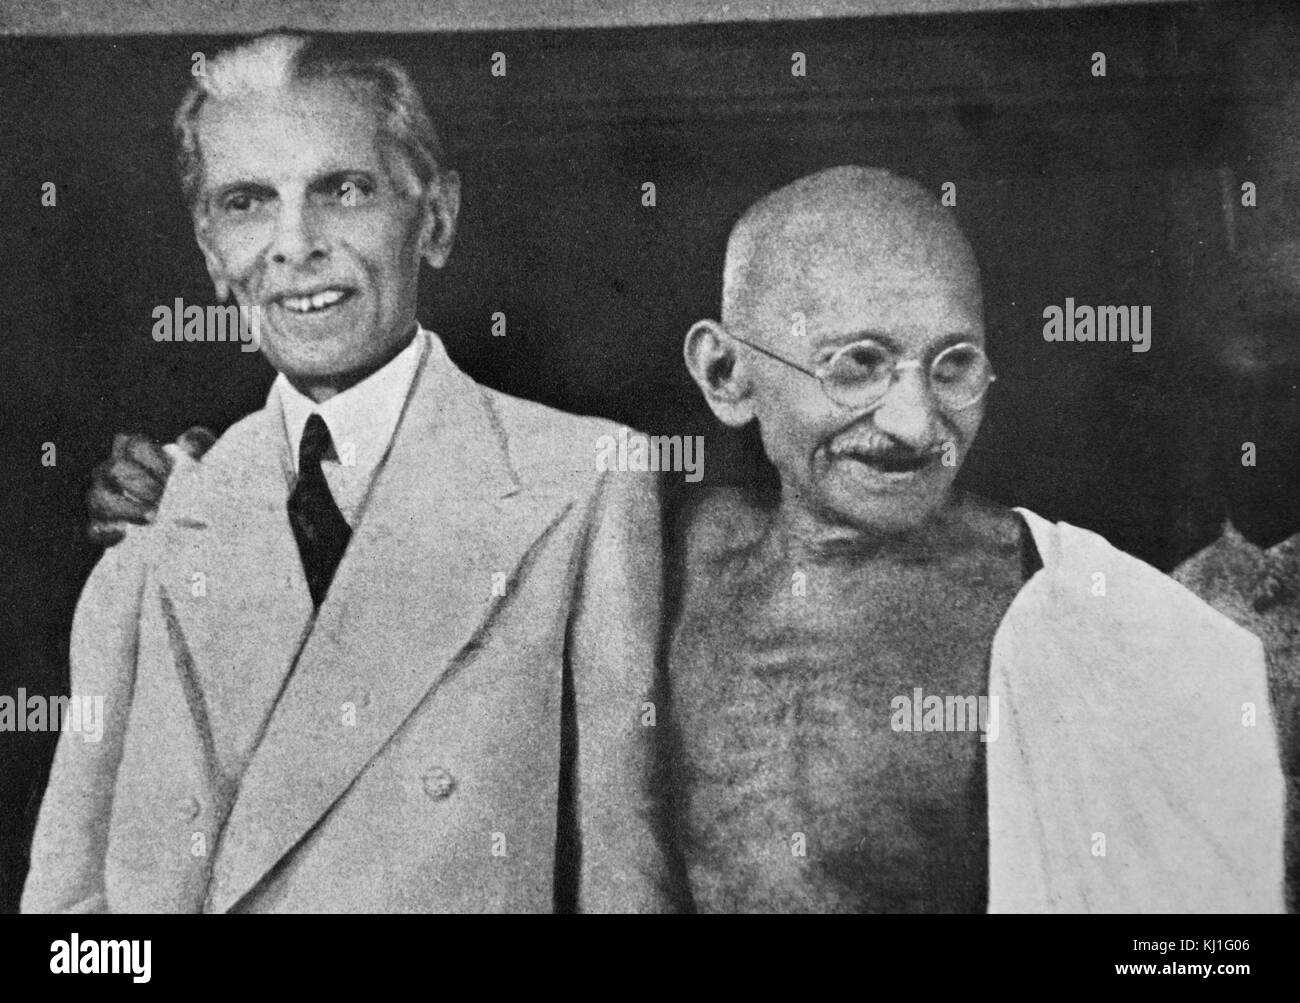 Mohandas Karamchand Gandhi (1869 – 1948) and Mohammed Ali Jinnah, during their talks in Mumbai (Bombay) 1944. Jinnah became the first leader of Pakistan. Gandhi was the preeminent leader of the Indian independence movement in British-ruled India. Stock Photo